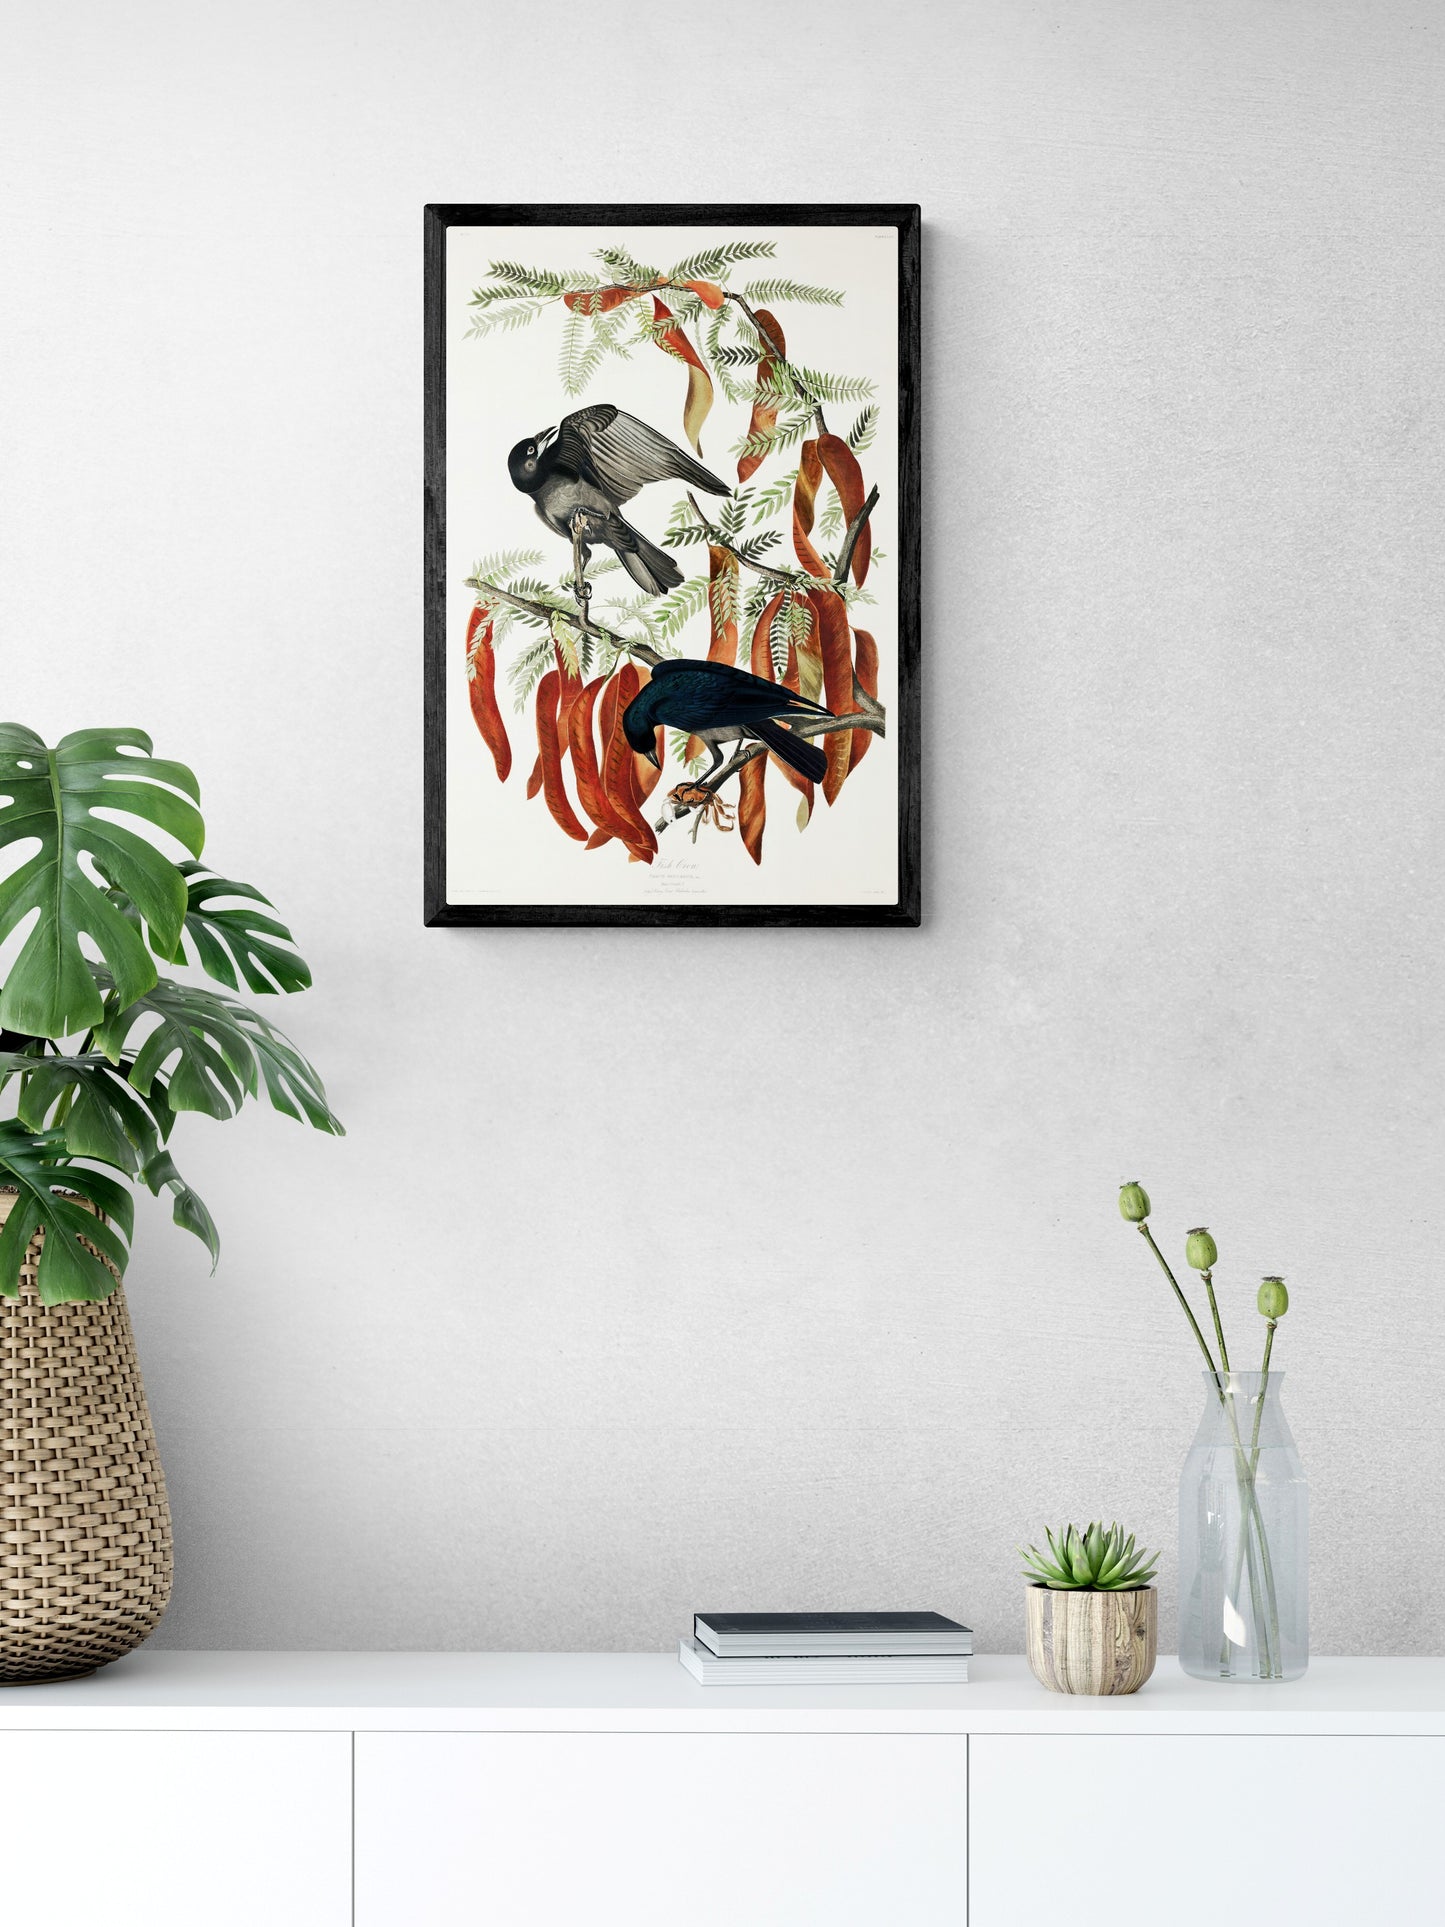 Vintage naturalistic bird illustrations: Fish Crow. Prints on art paper, canvas, and framed canvas. Free shipping in the USA. SKUJJA046